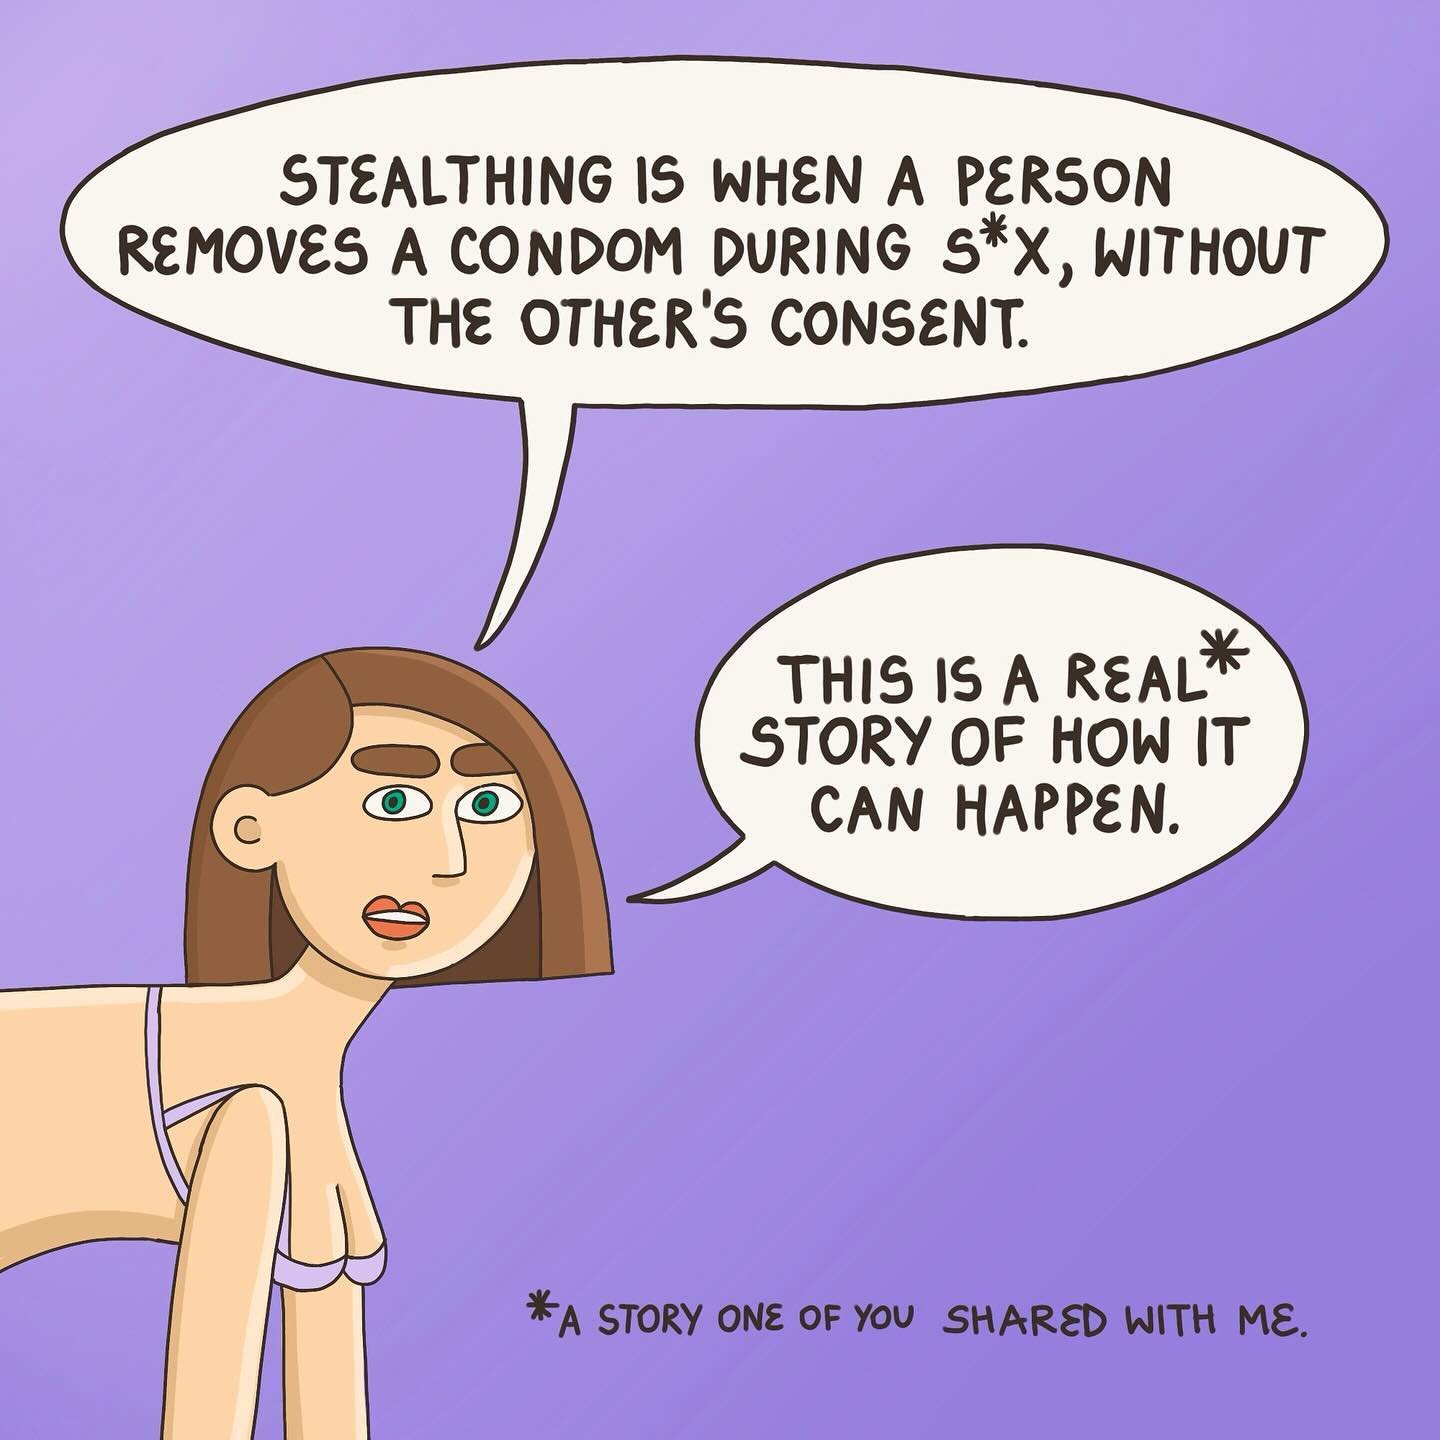 A story about stealthing. 

#womenshealth #womenshealthmatters #womensrights #womensrightsarehumanrights #stealthing #consent #consentmatters